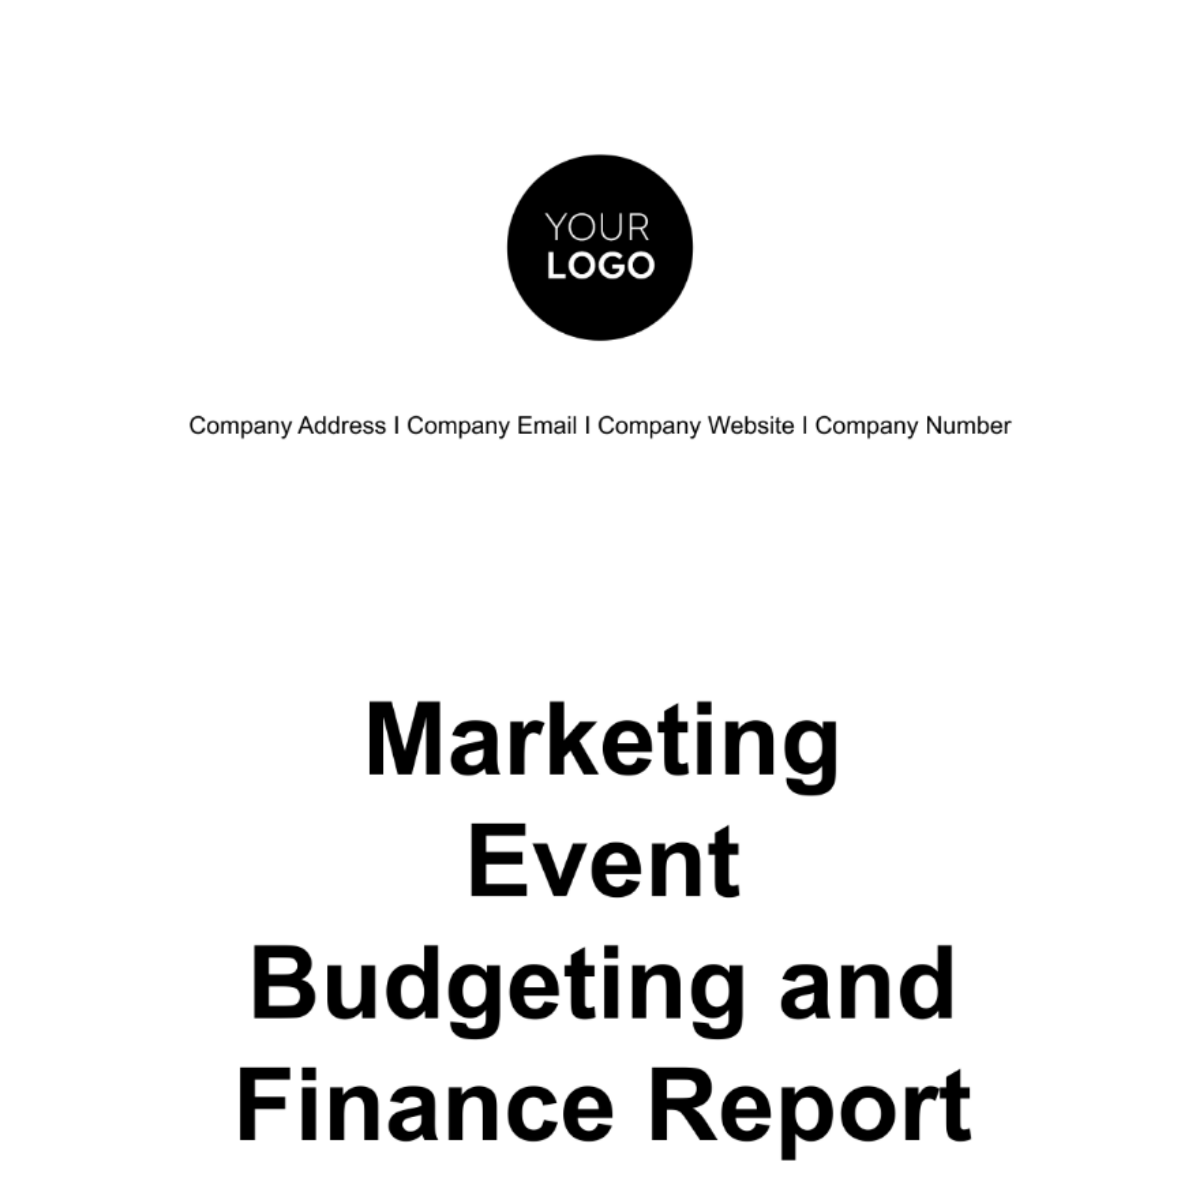 Marketing Event Budgeting and Finance Report Template